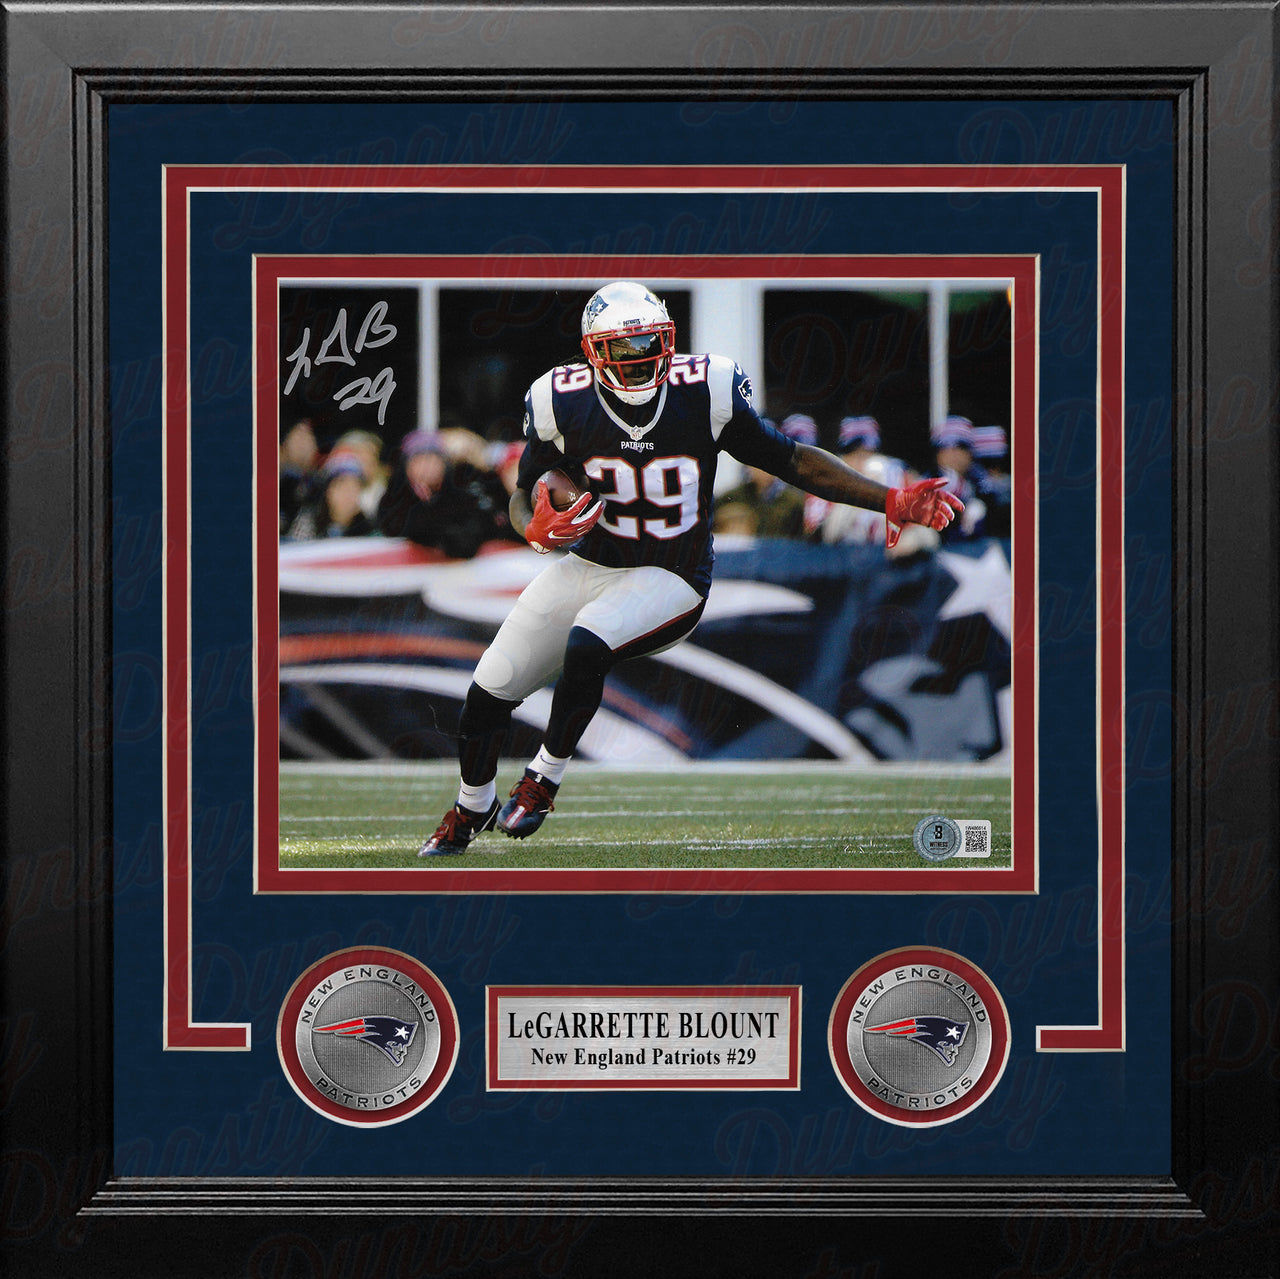 LeGarrette Blount in Action Autographed New England Patriots 8" x 10" Framed Football Photo